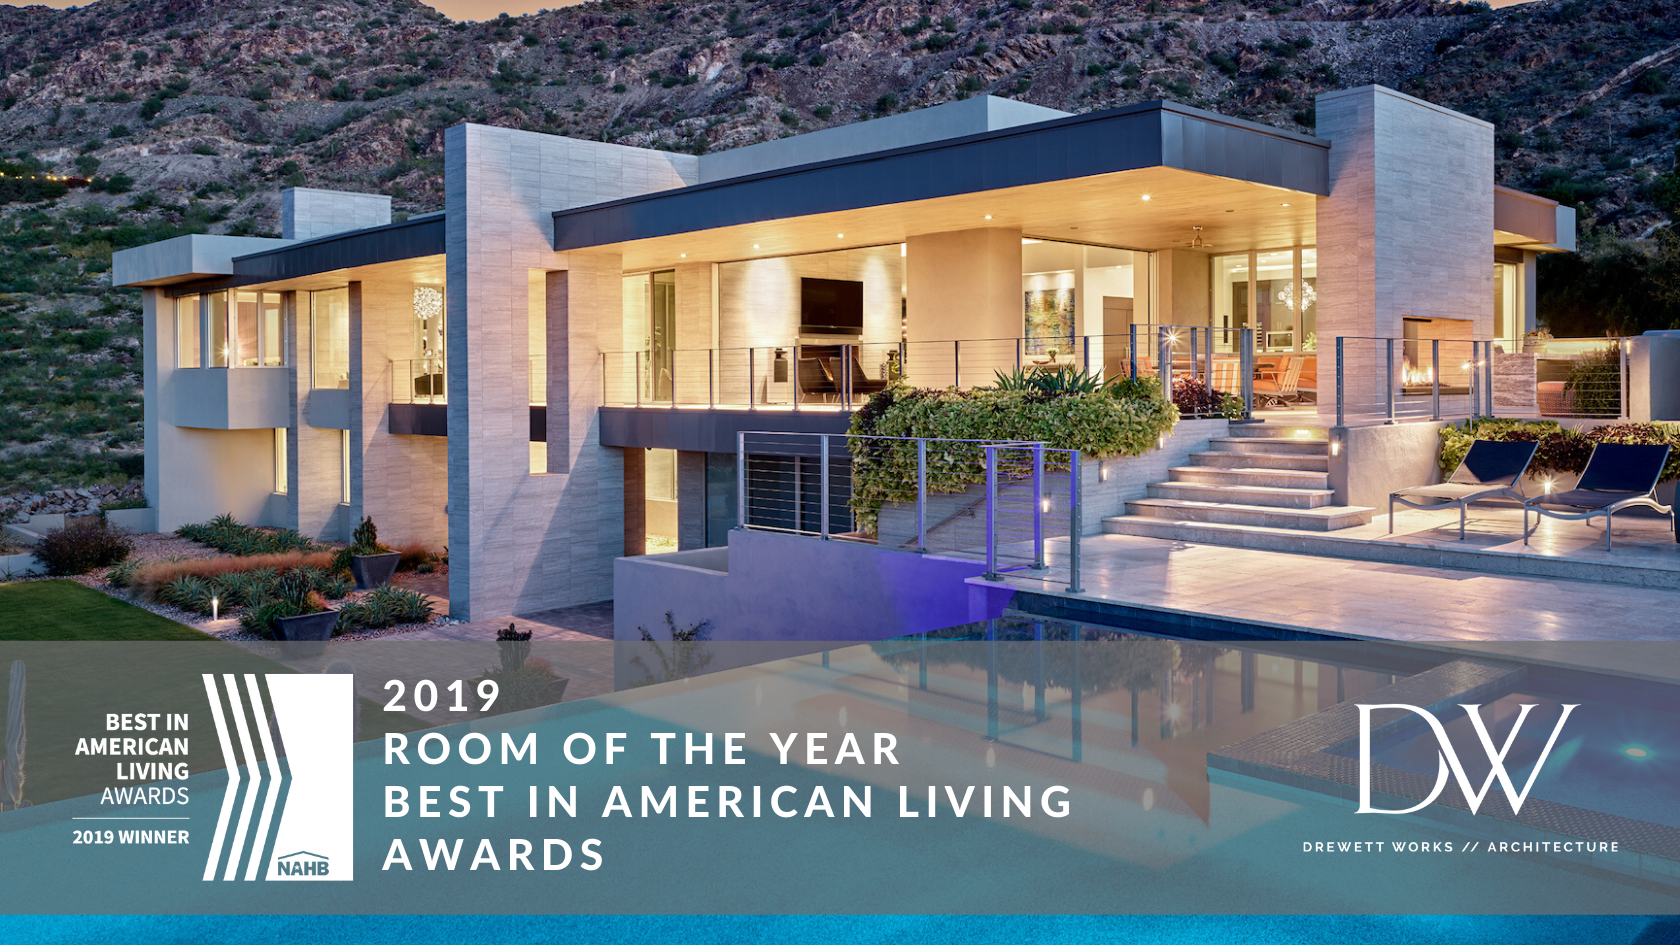 Best in American Living Awards Room of the Year 2019